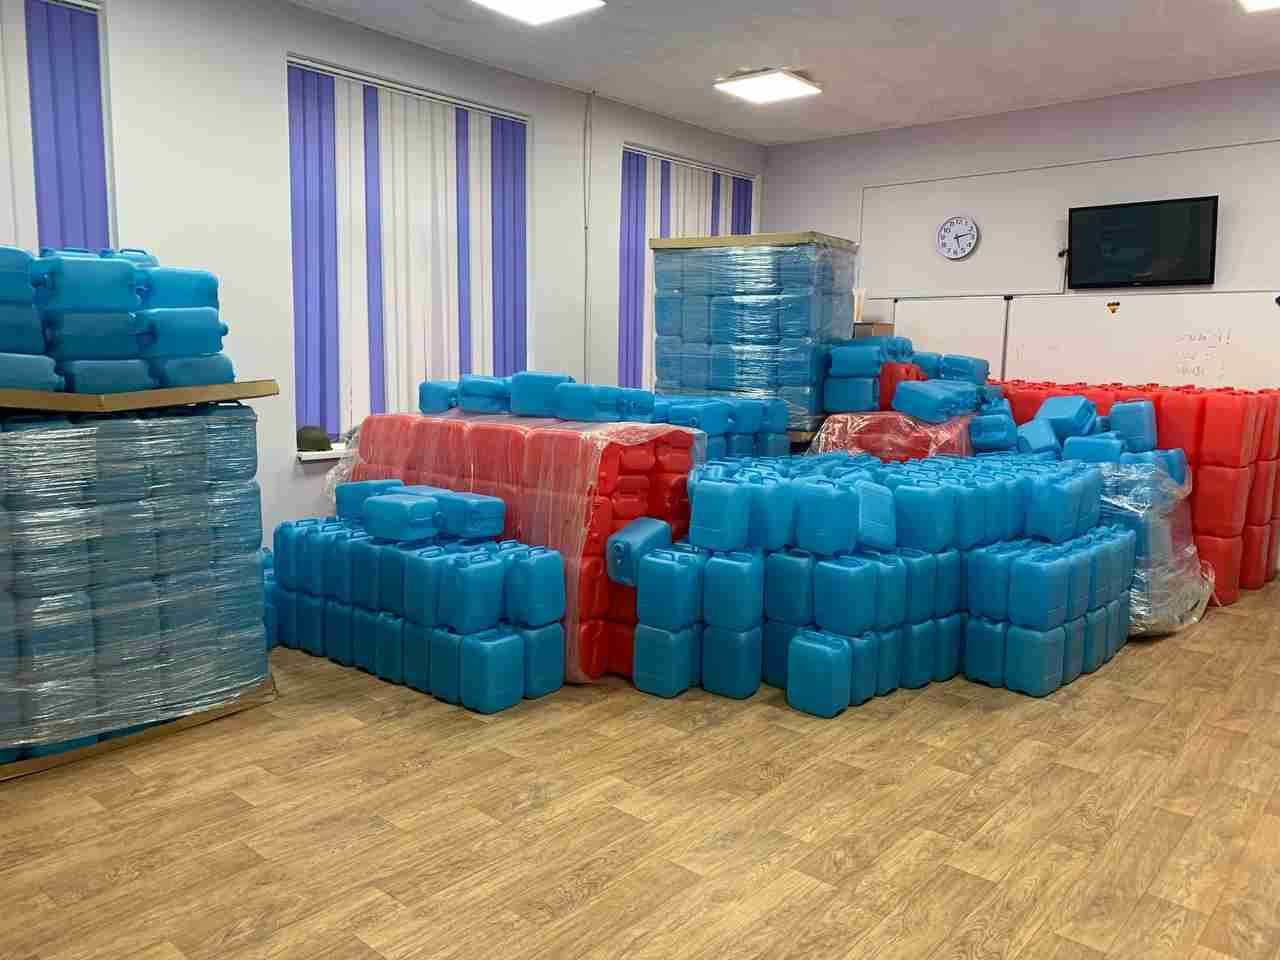 Another batch of water containers donated by Euromoldings arrived in Mykolaev.